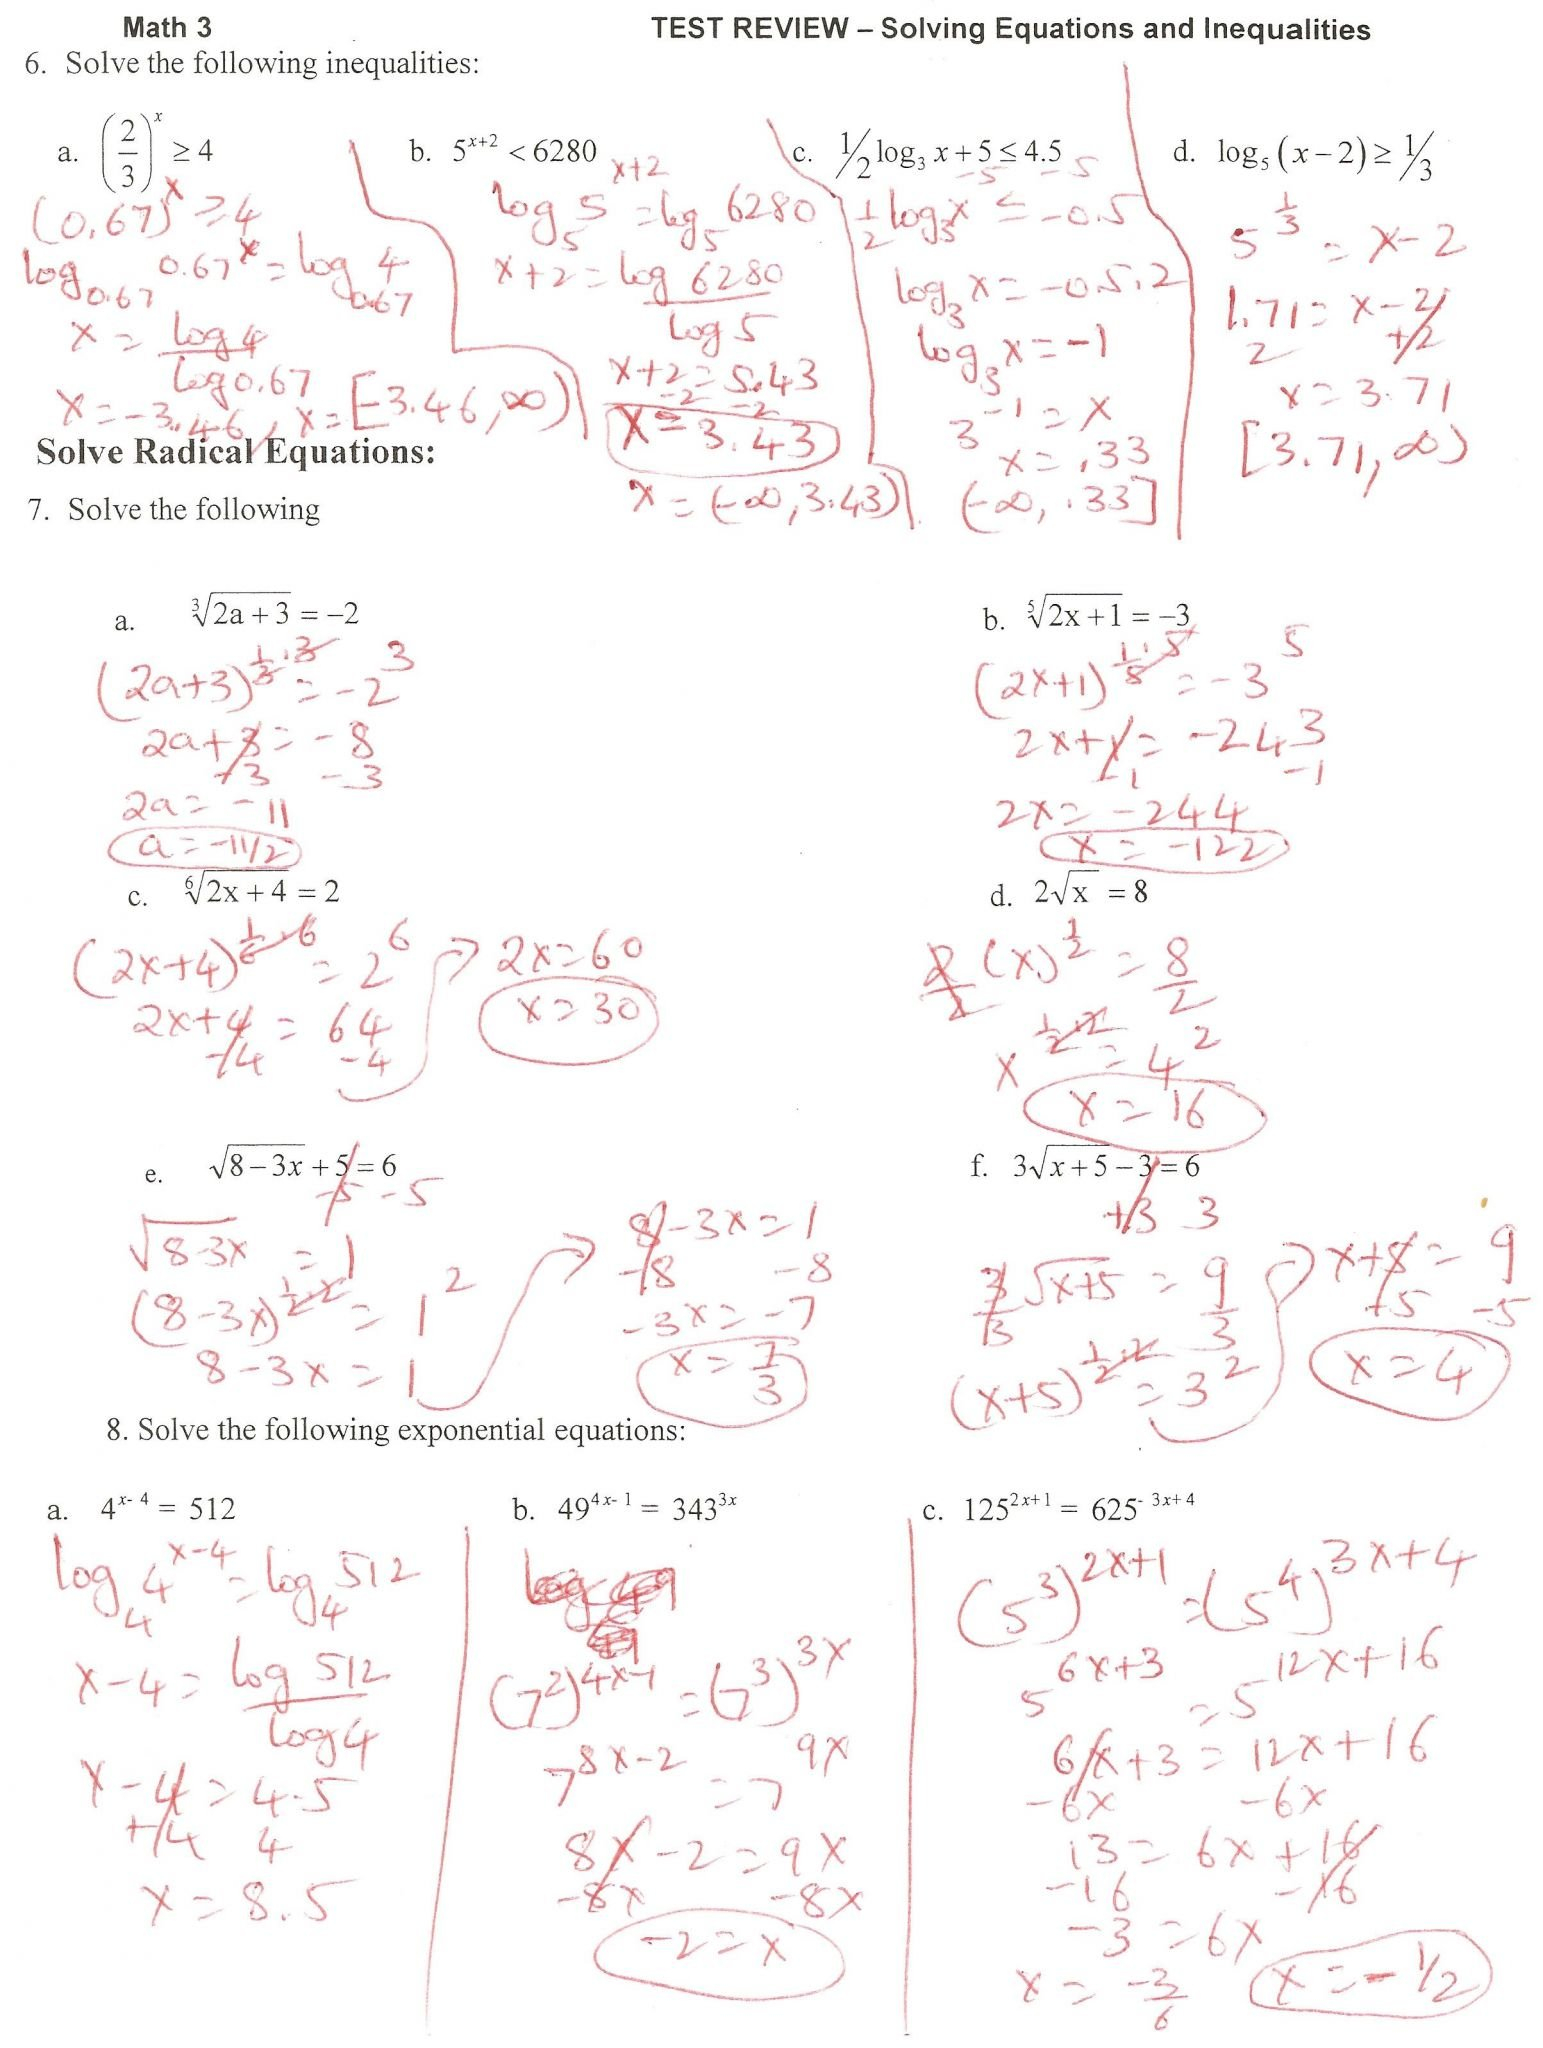 Solving Exponential Equations Worksheet With Answers  Briefencounters With Regard To Solving Equations Worksheet Answers